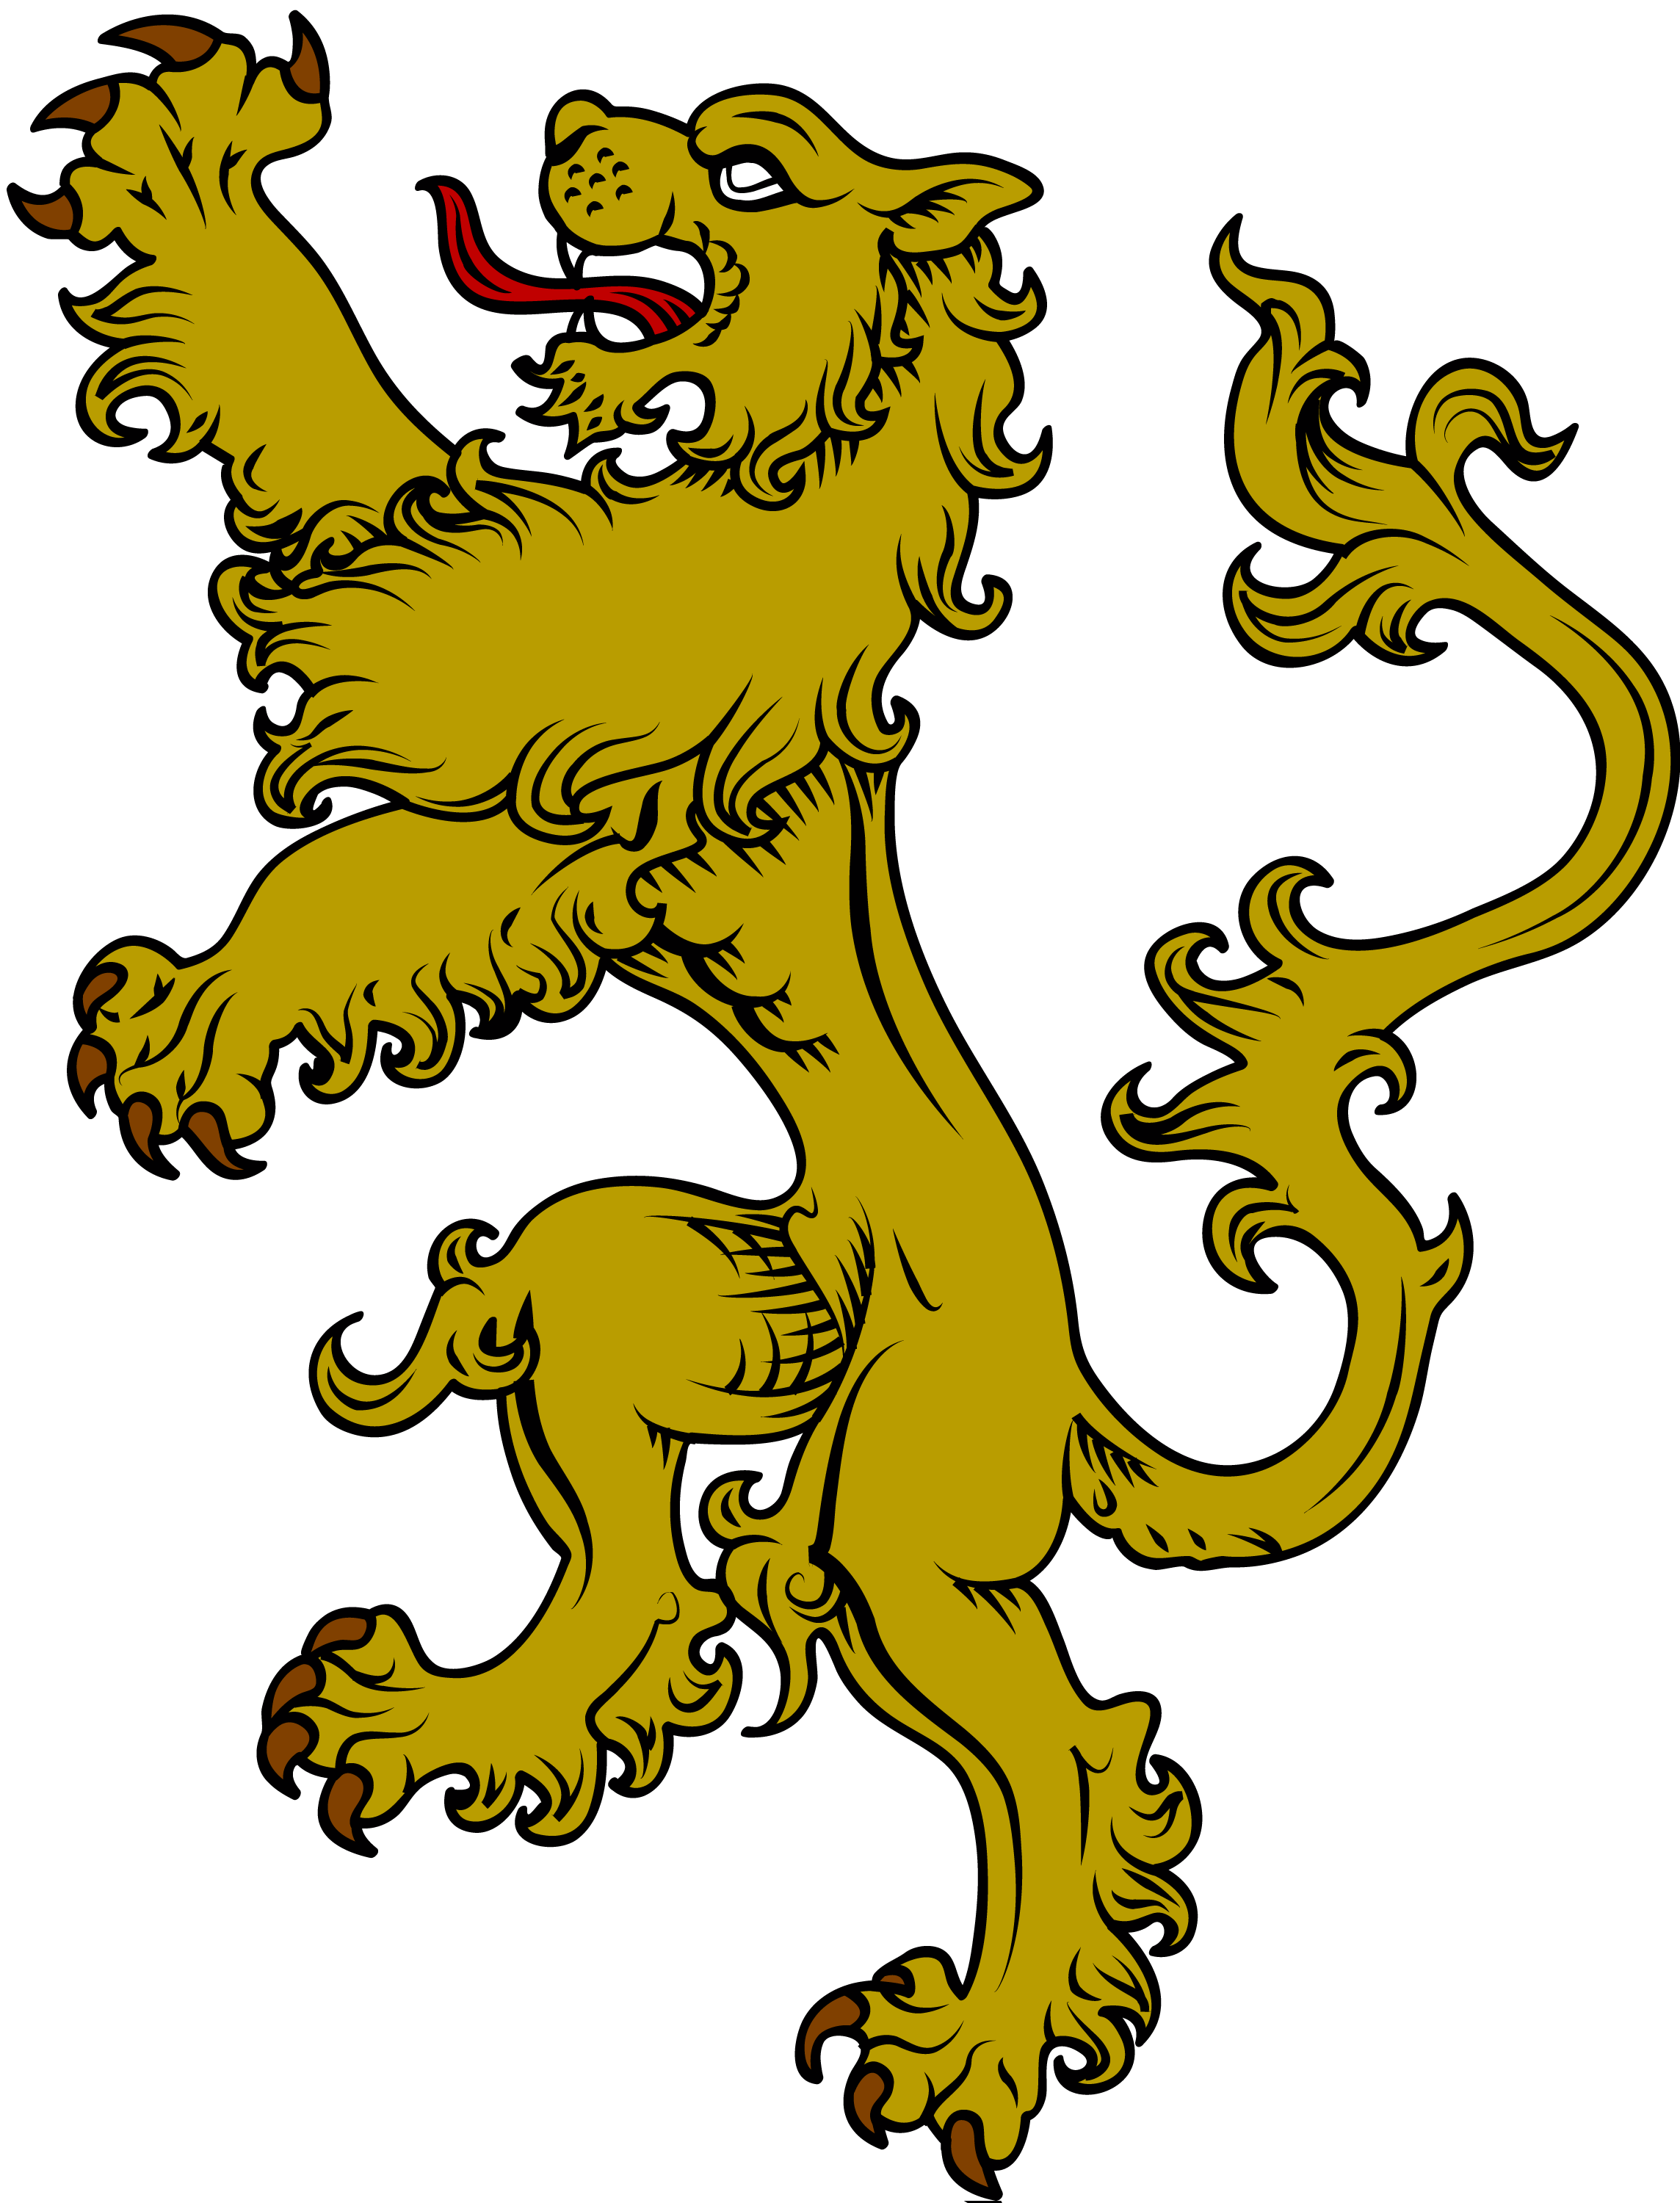 Greek clipart aristocracy. The symbol of a